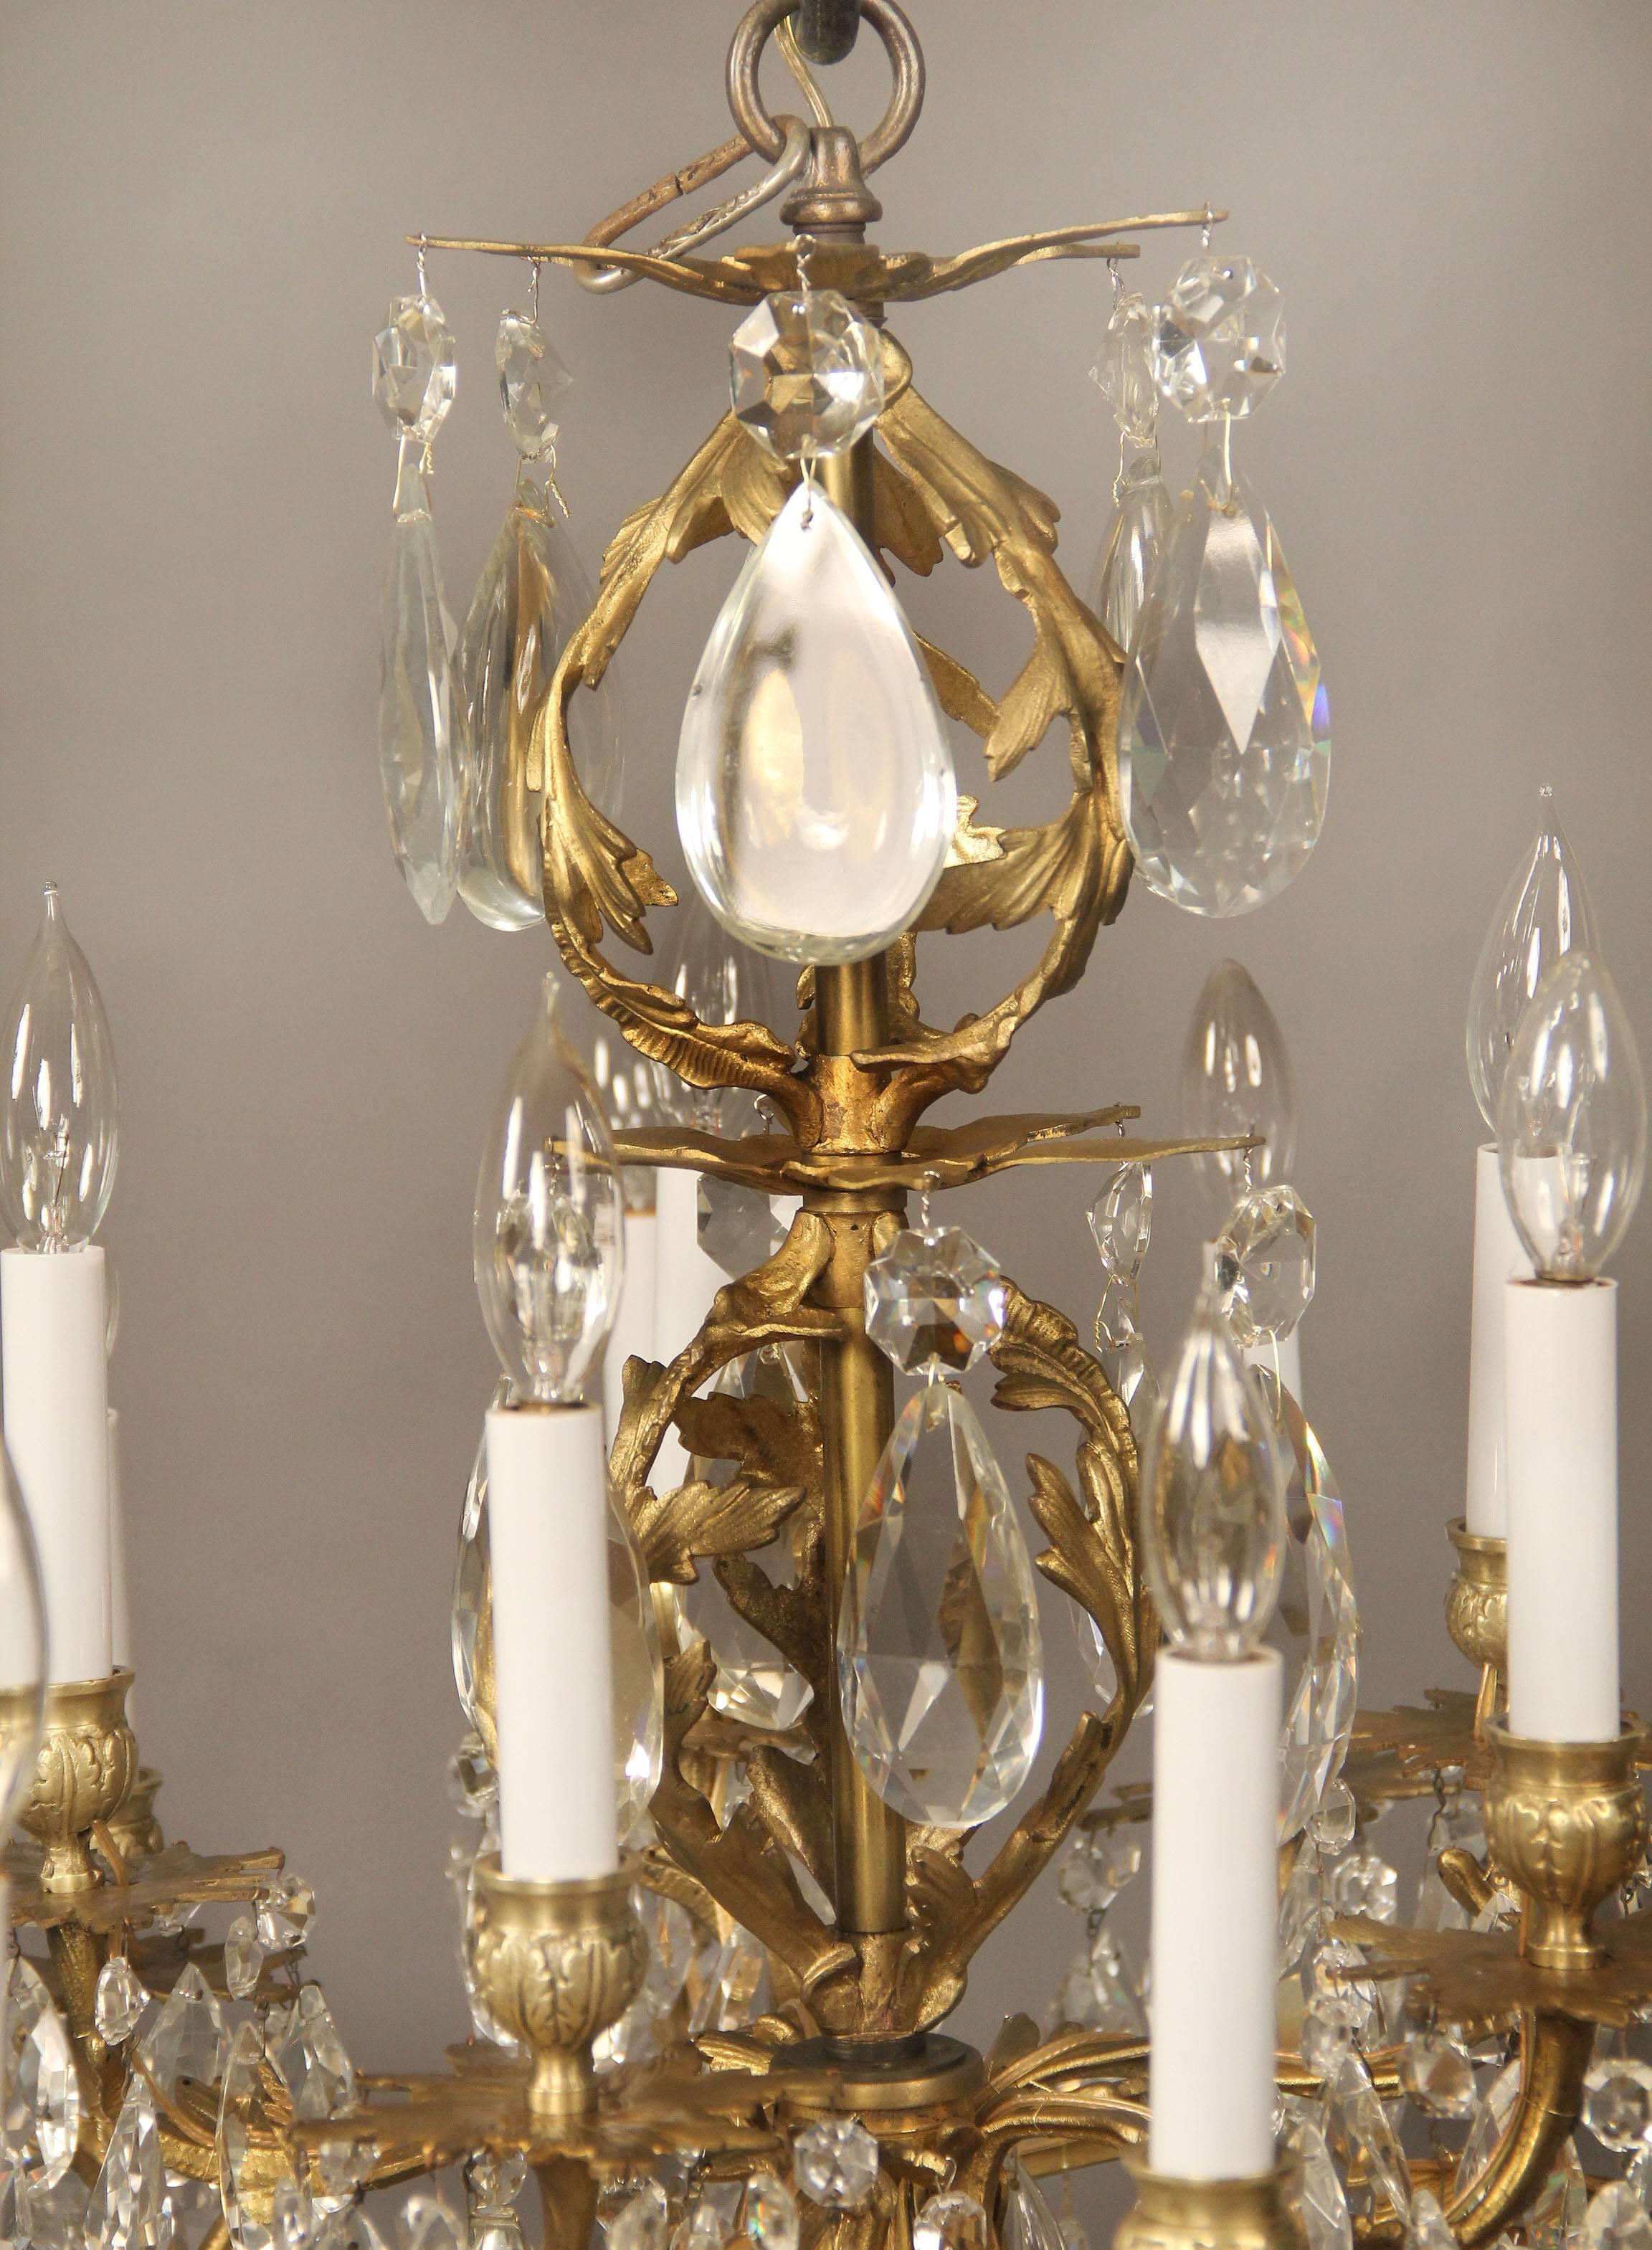 A nice late 19th century gilt bronze and cut crystal fifteen-light chandelier.

Multifaceted and shaped crystal, fifteen tiered perimeter lights.

If you are looking for a chandelier, a lantern or sets of sconces, Charles Cheriff Galleries is